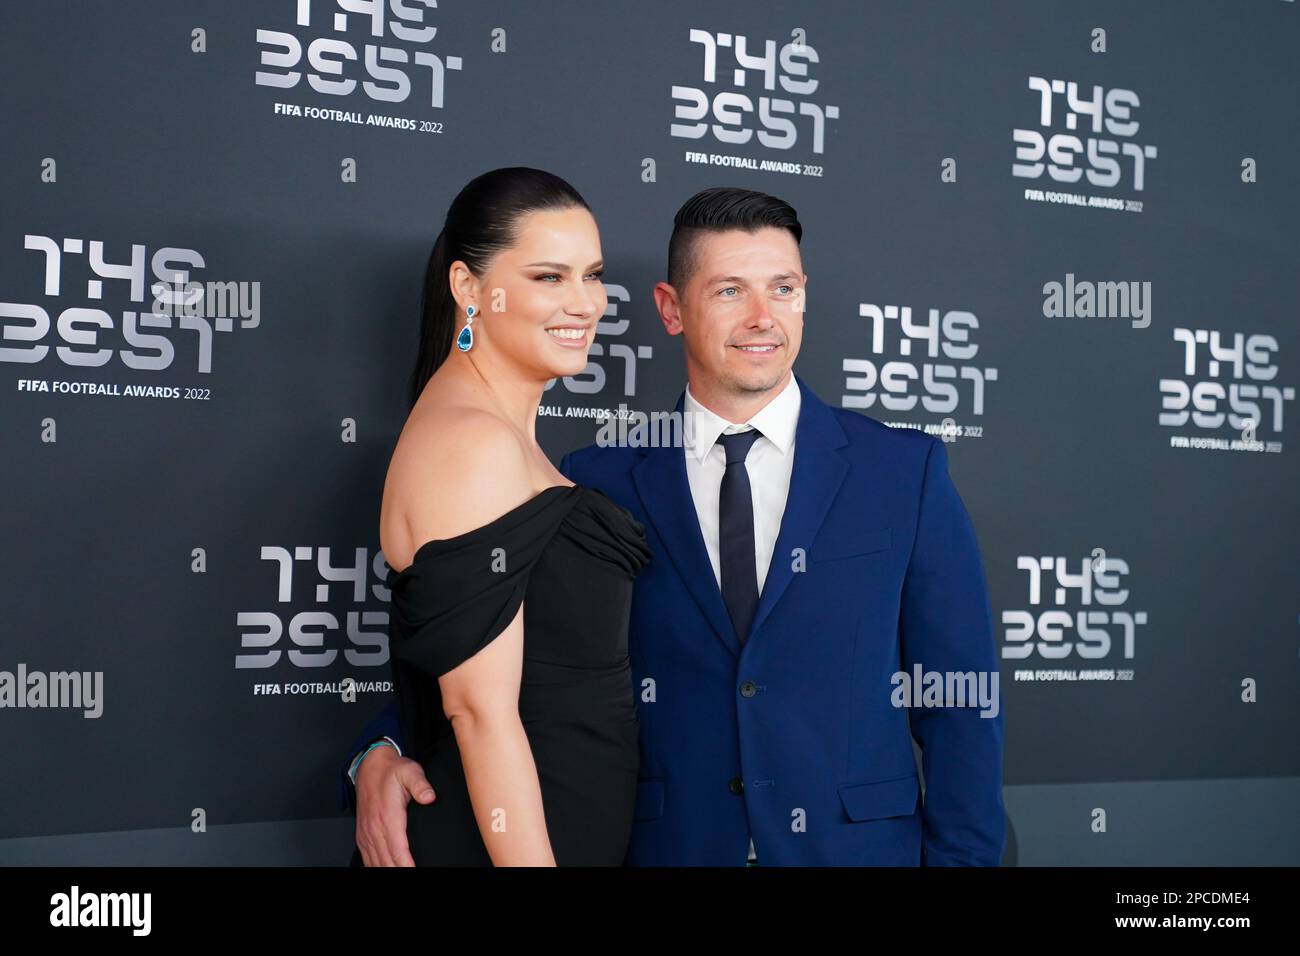 Paris, France. 27th Feb, 2023. Supermodel and Victoria's secret icon Adriana Lima and her boyfriend Andre Lemmers on the green carpet at arrival during the The Best FIFA Football Awards 2022 at Salle Pleyel in Paris, France. (Foto: Daniela Porcelli/Sports Press Photo/C - ONE HOUR DEADLINE - ONLY ACTIVATE FTP IF IMAGES LESS THAN ONE HOUR OLD - Alamy) Credit: SPP Sport Press Photo. /Alamy Live News Stock Photo